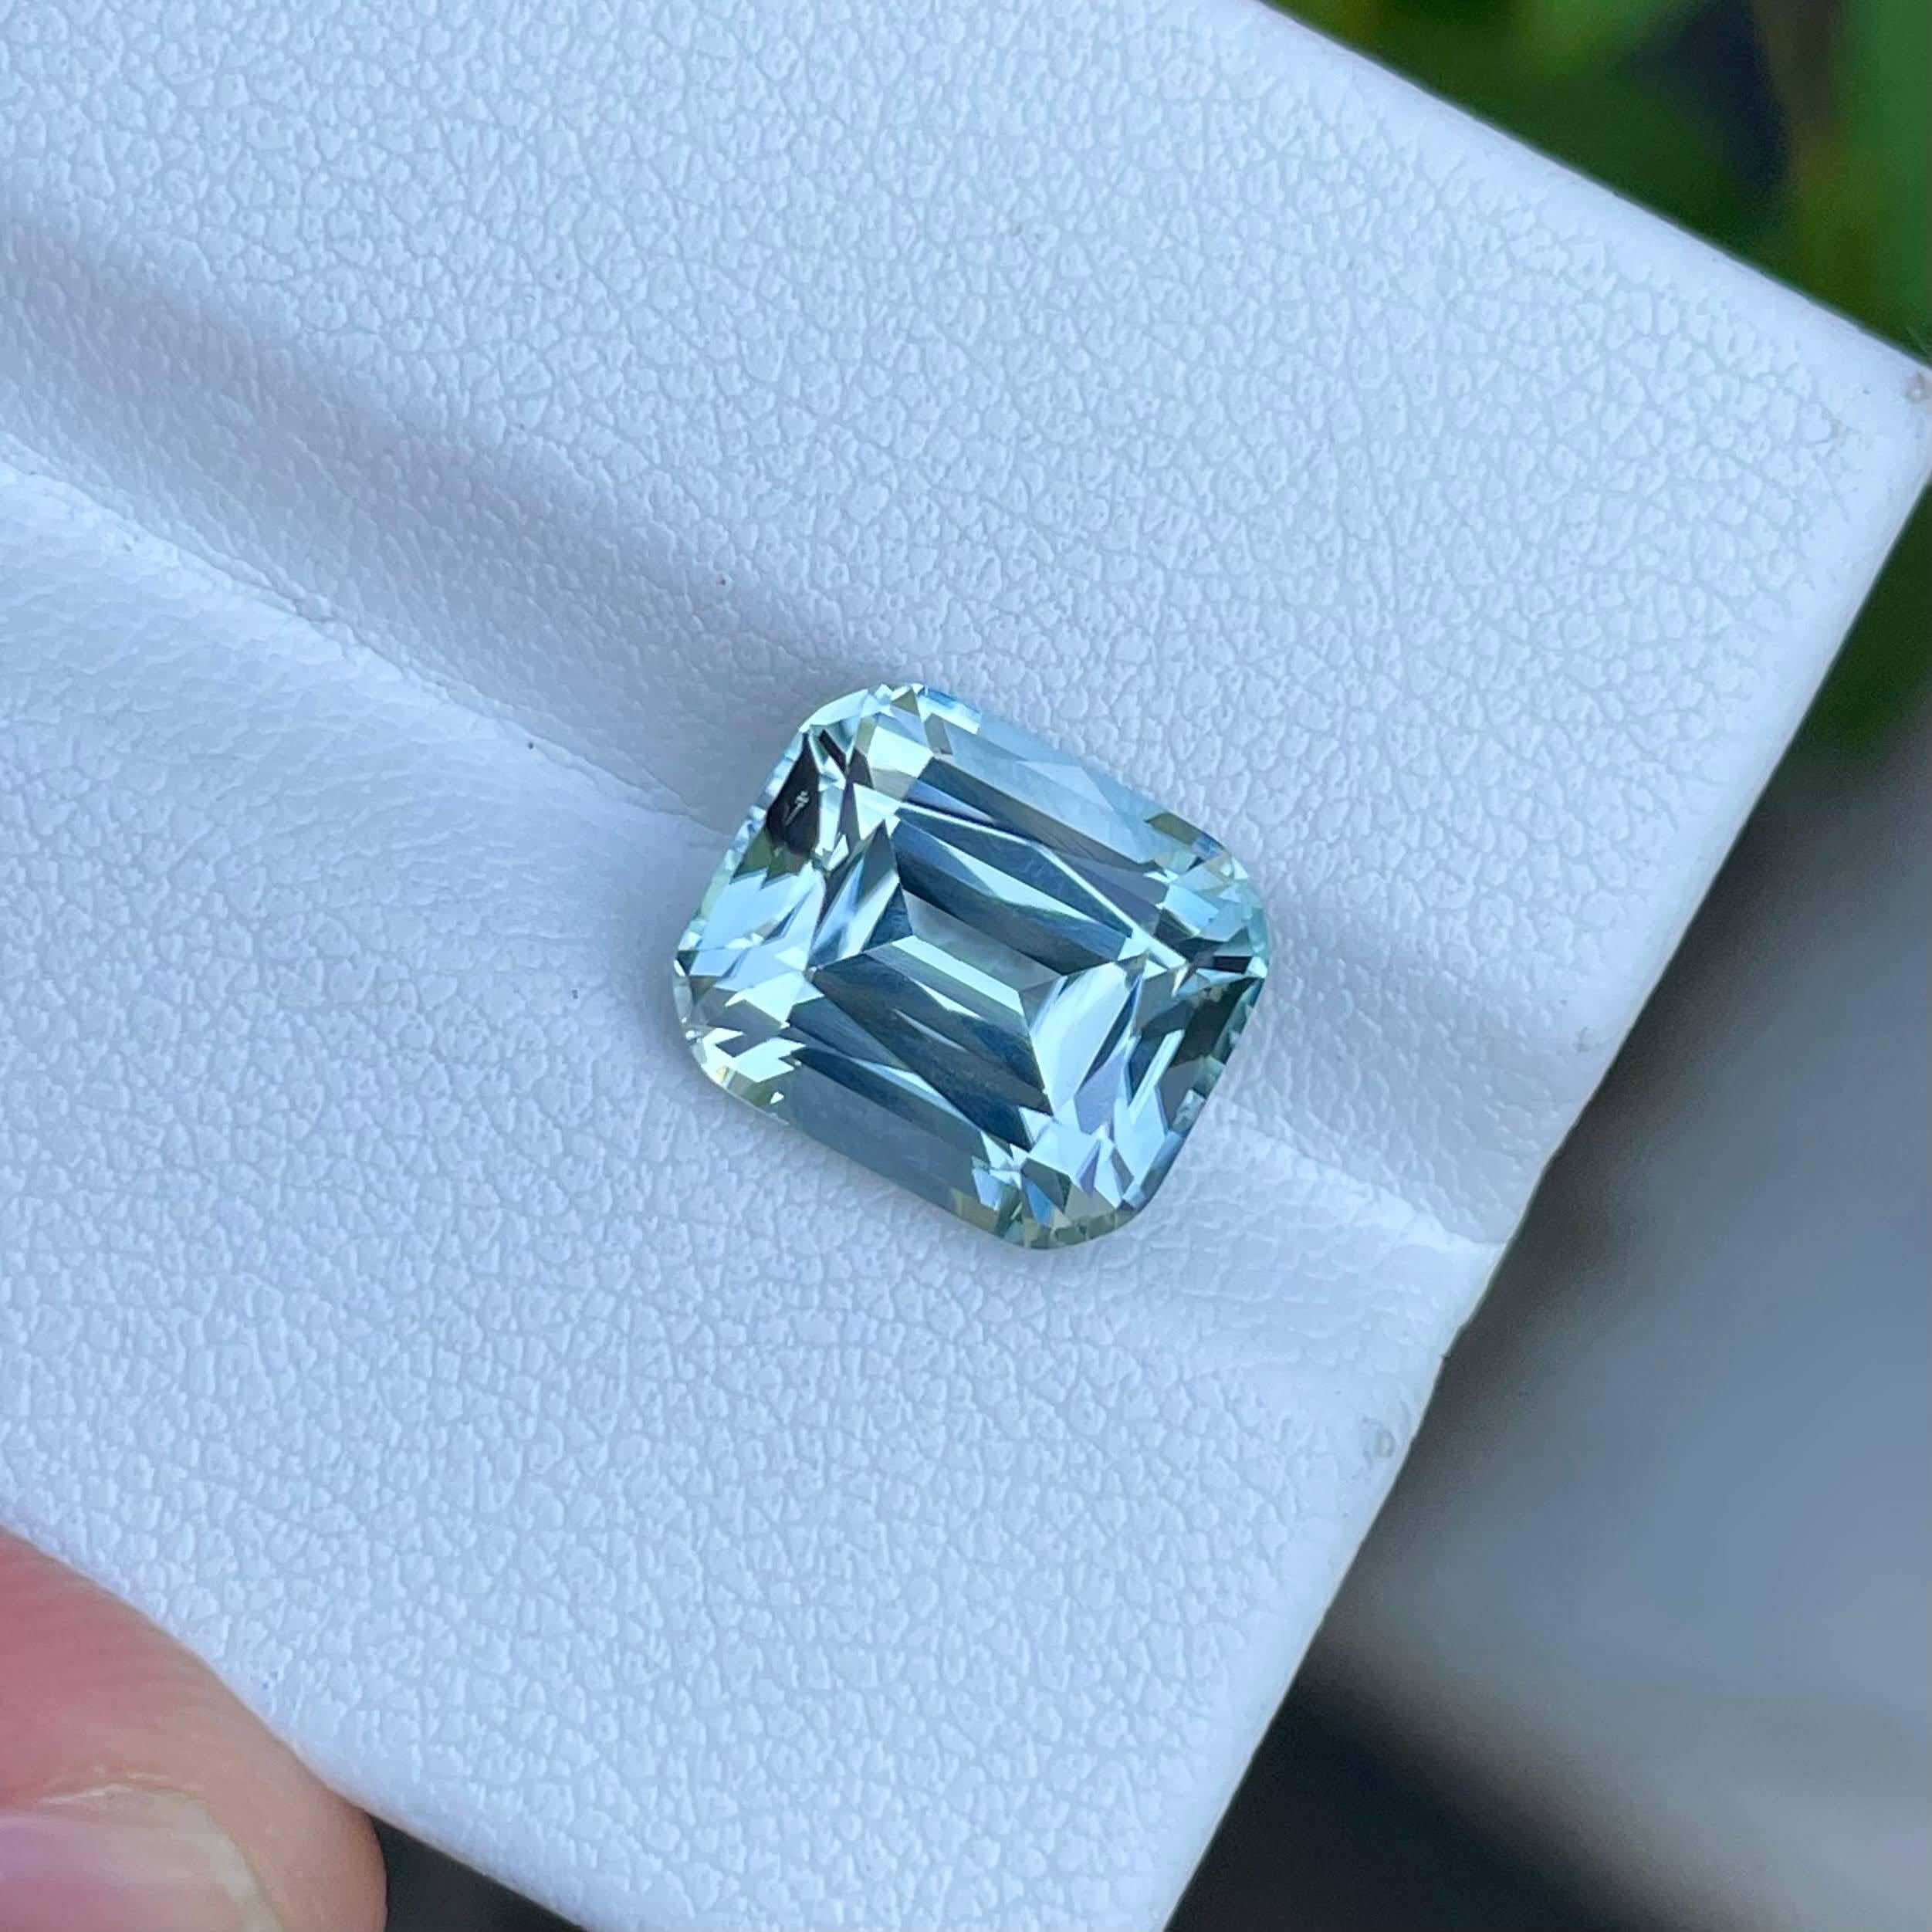 Weight: 5.74 carats
11x9.35x7.2 mm
Clarity : Loupe Clean
Treatment : None
Origin: Afghanistan
Shape: Cushion
Cut: Step Cushion





The 5.74-carat Achroite Tourmaline is an exquisite natural gemstone sourced from Afghanistan, renowned for its